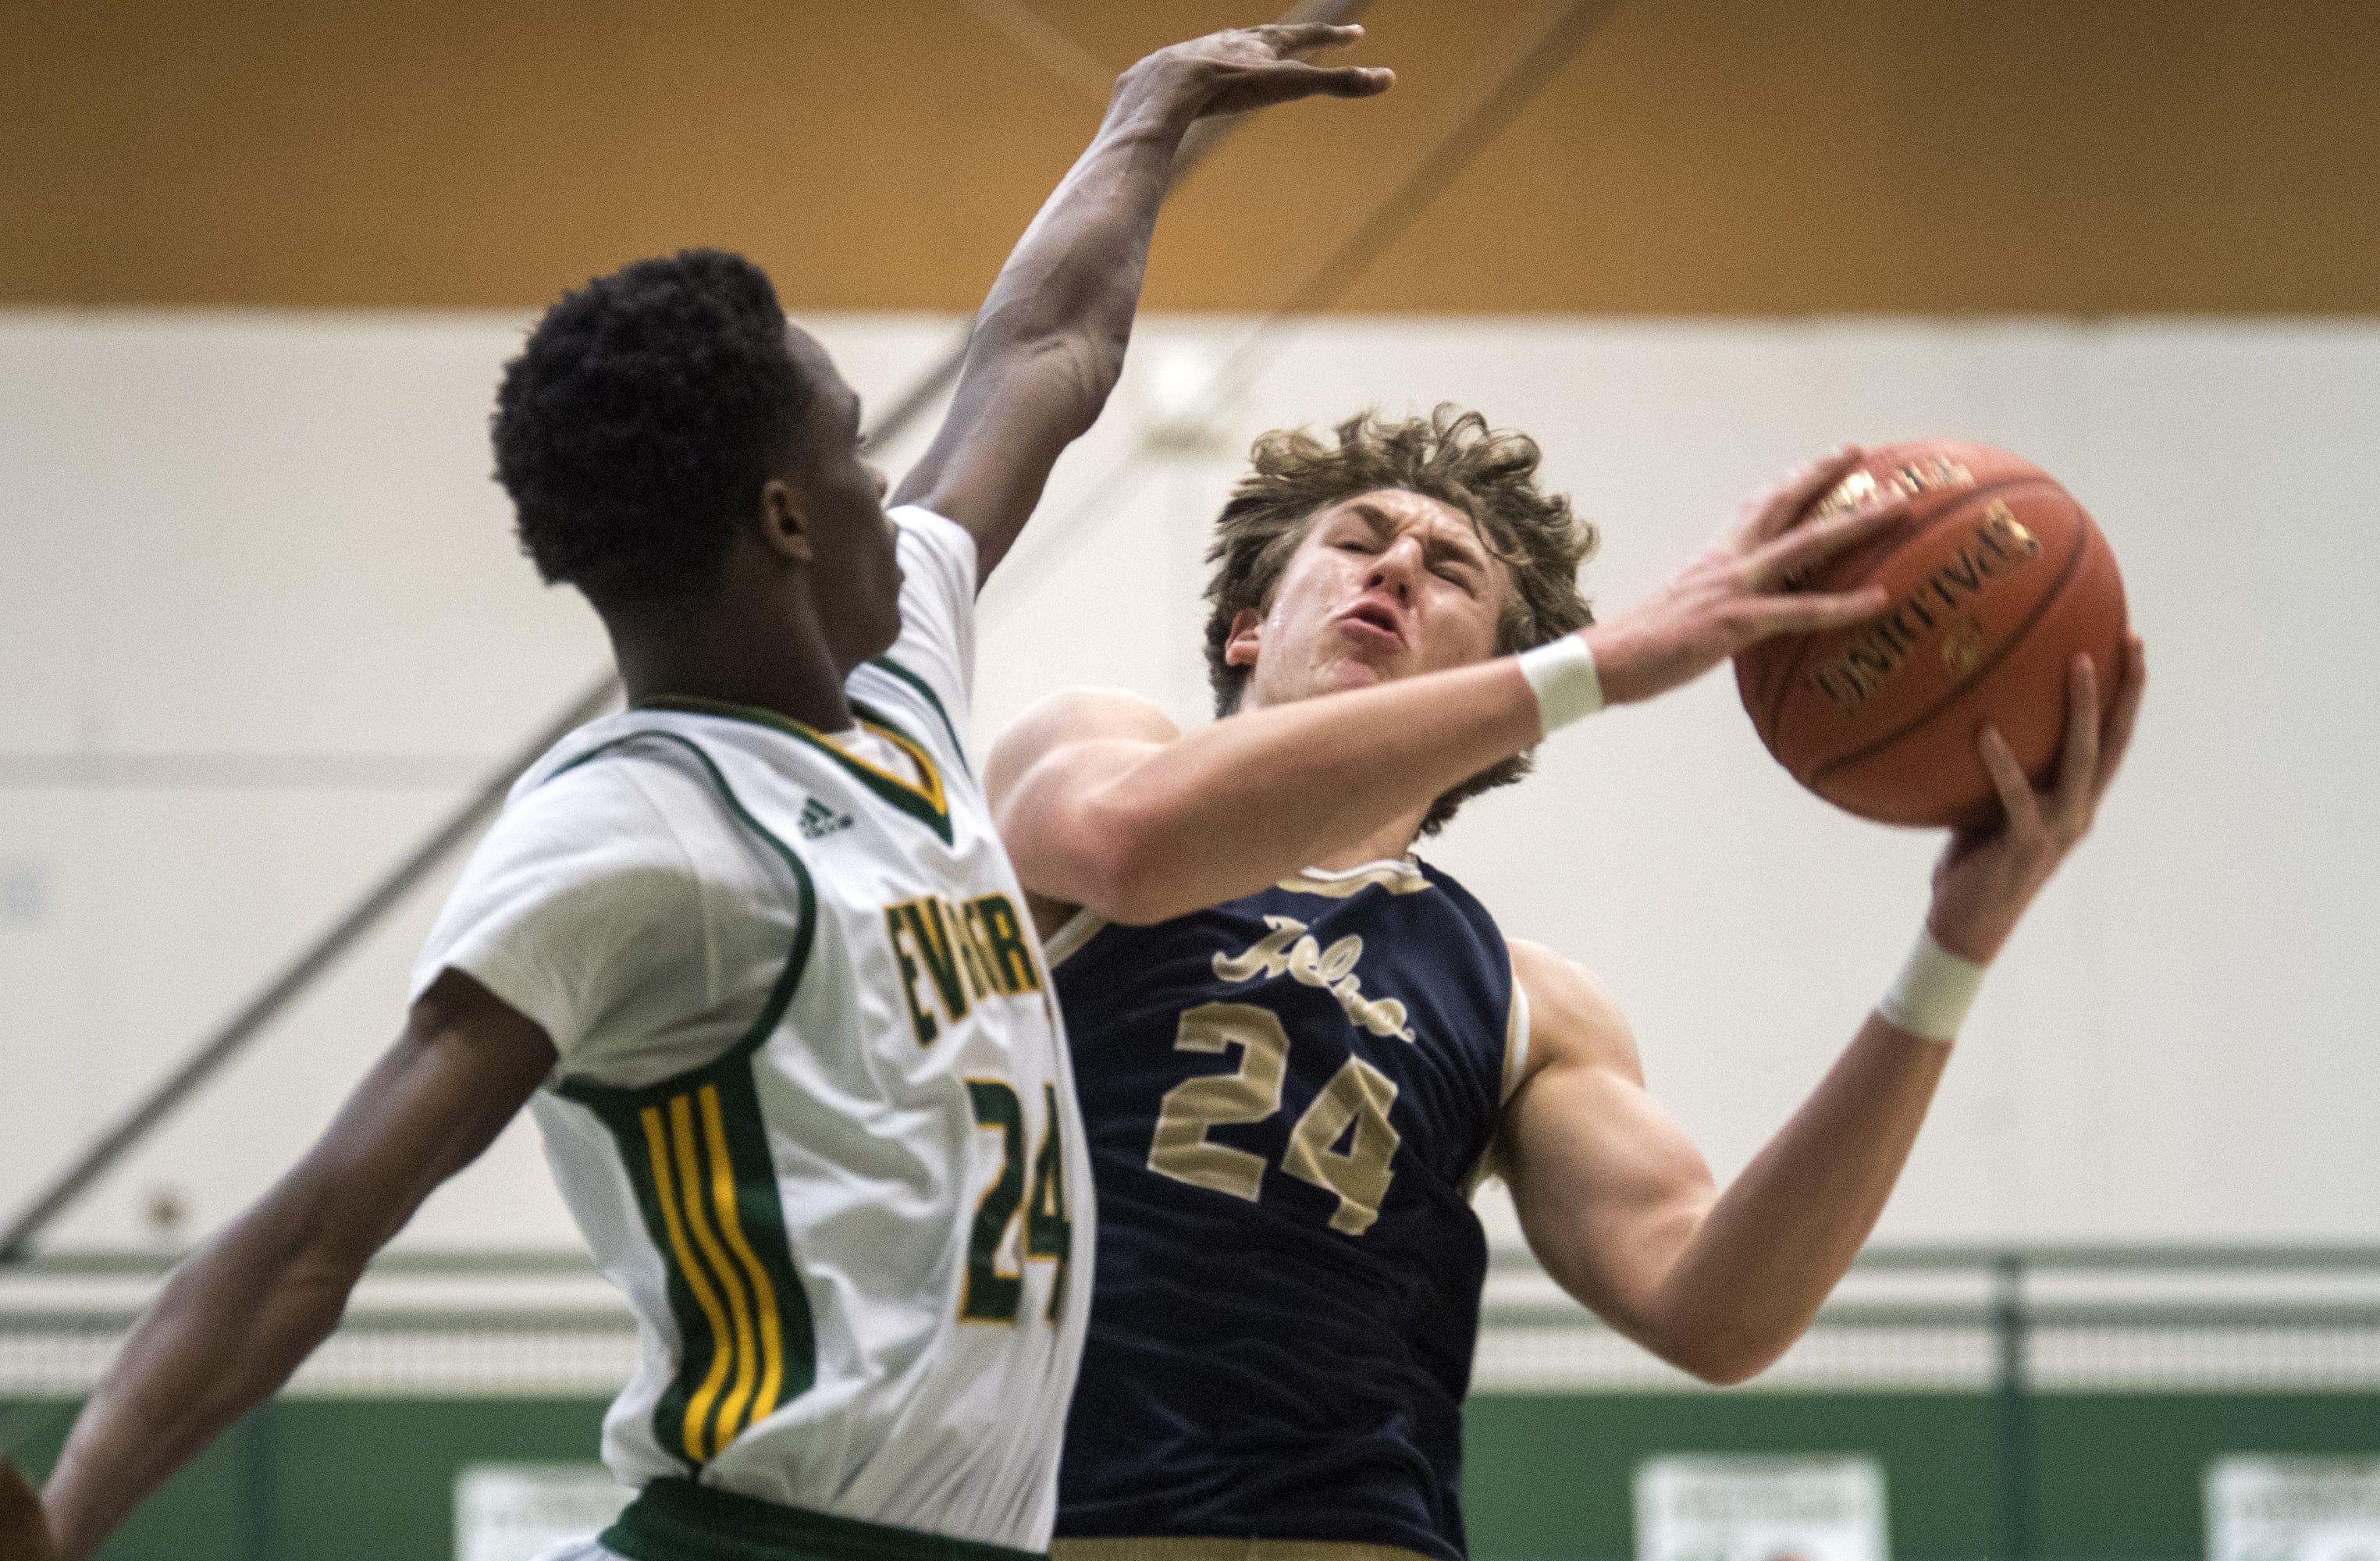 Evergreen's Mario Herring (24) jumps to block Kelso's Shaw Anderson (24) during Tuesday night's game at Evergreen High School in Vancouver on Jan. 8, 2019. Kelso won 79-74.